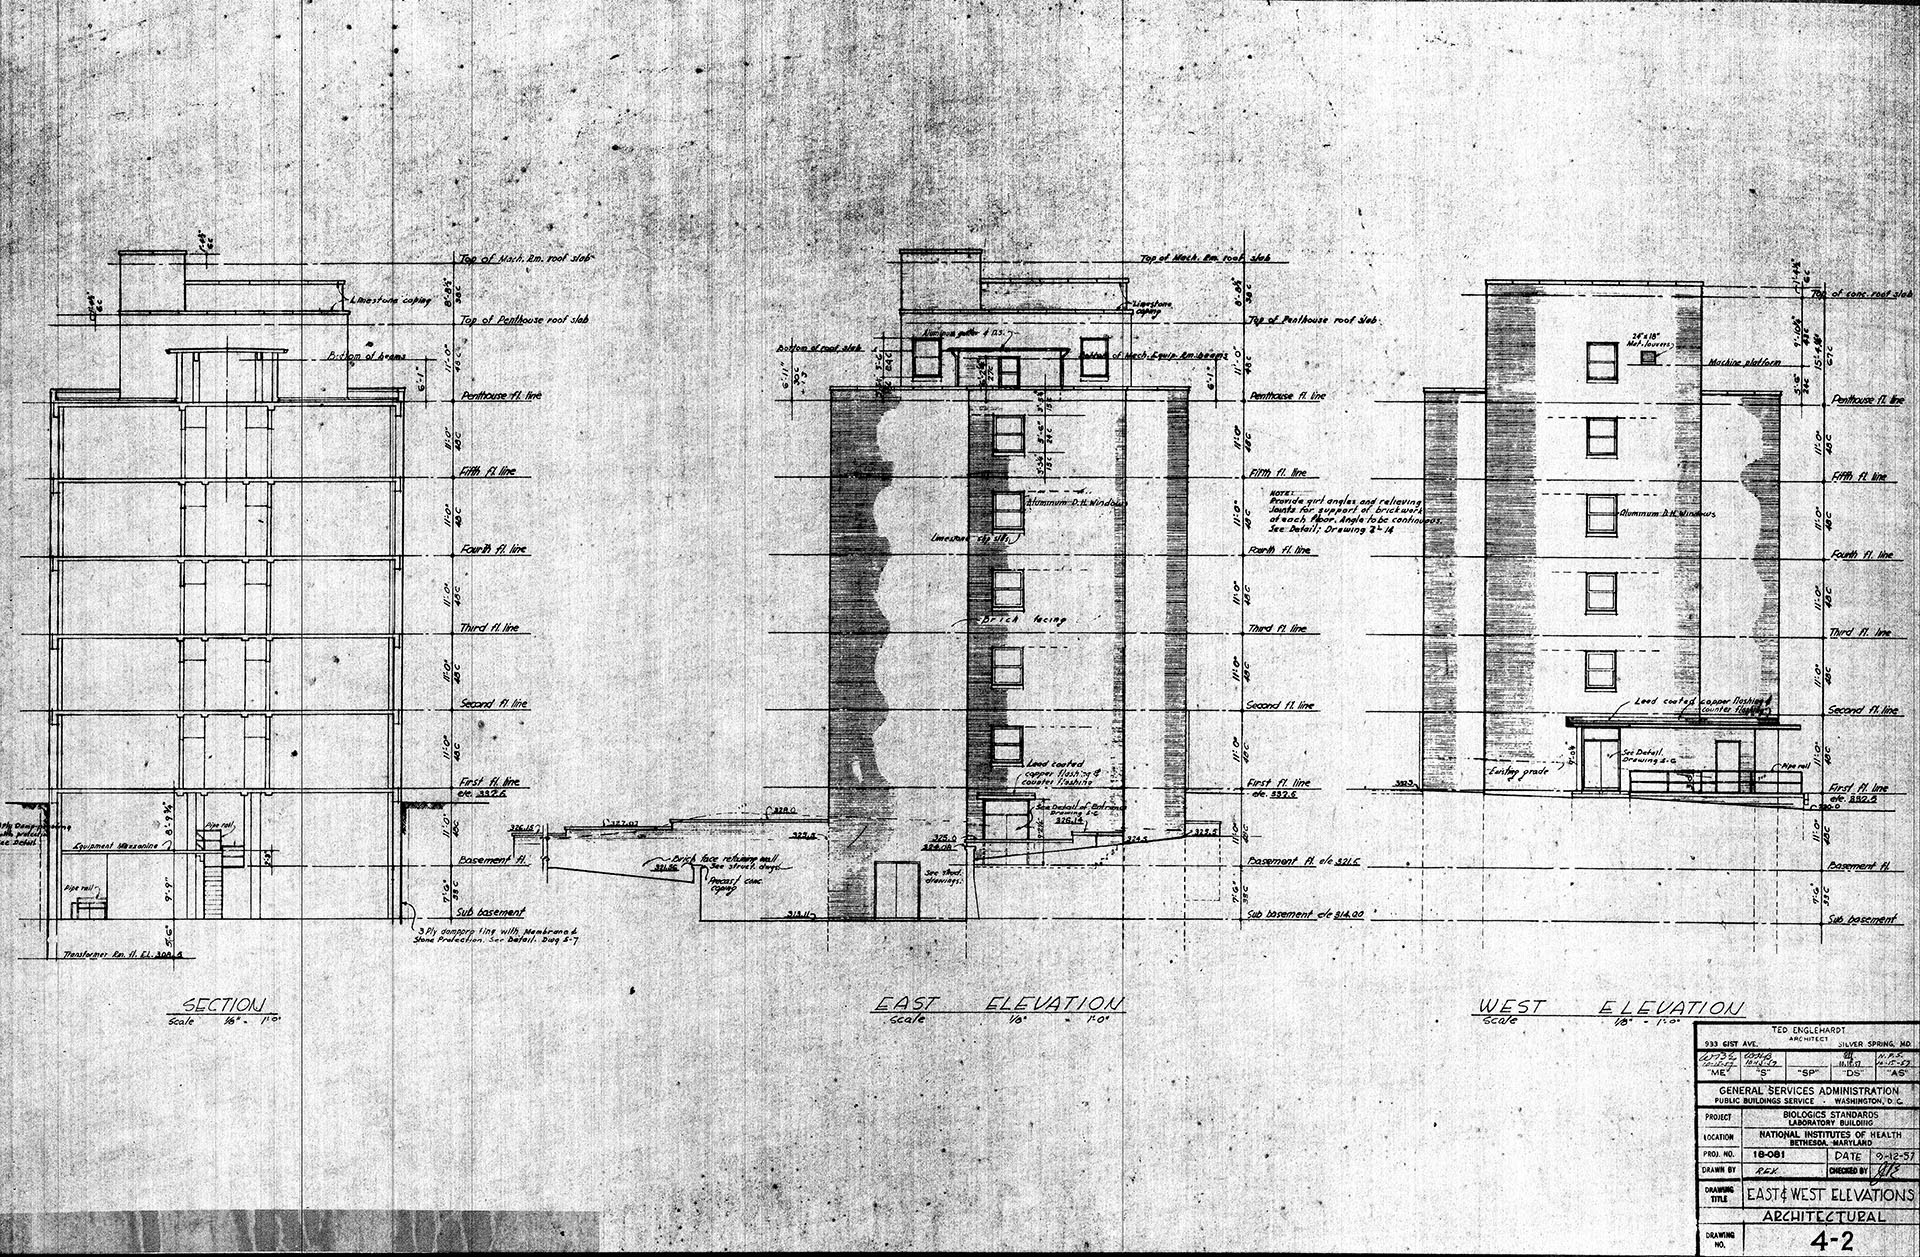 Side elevations of Building 29 (east and west) drawing